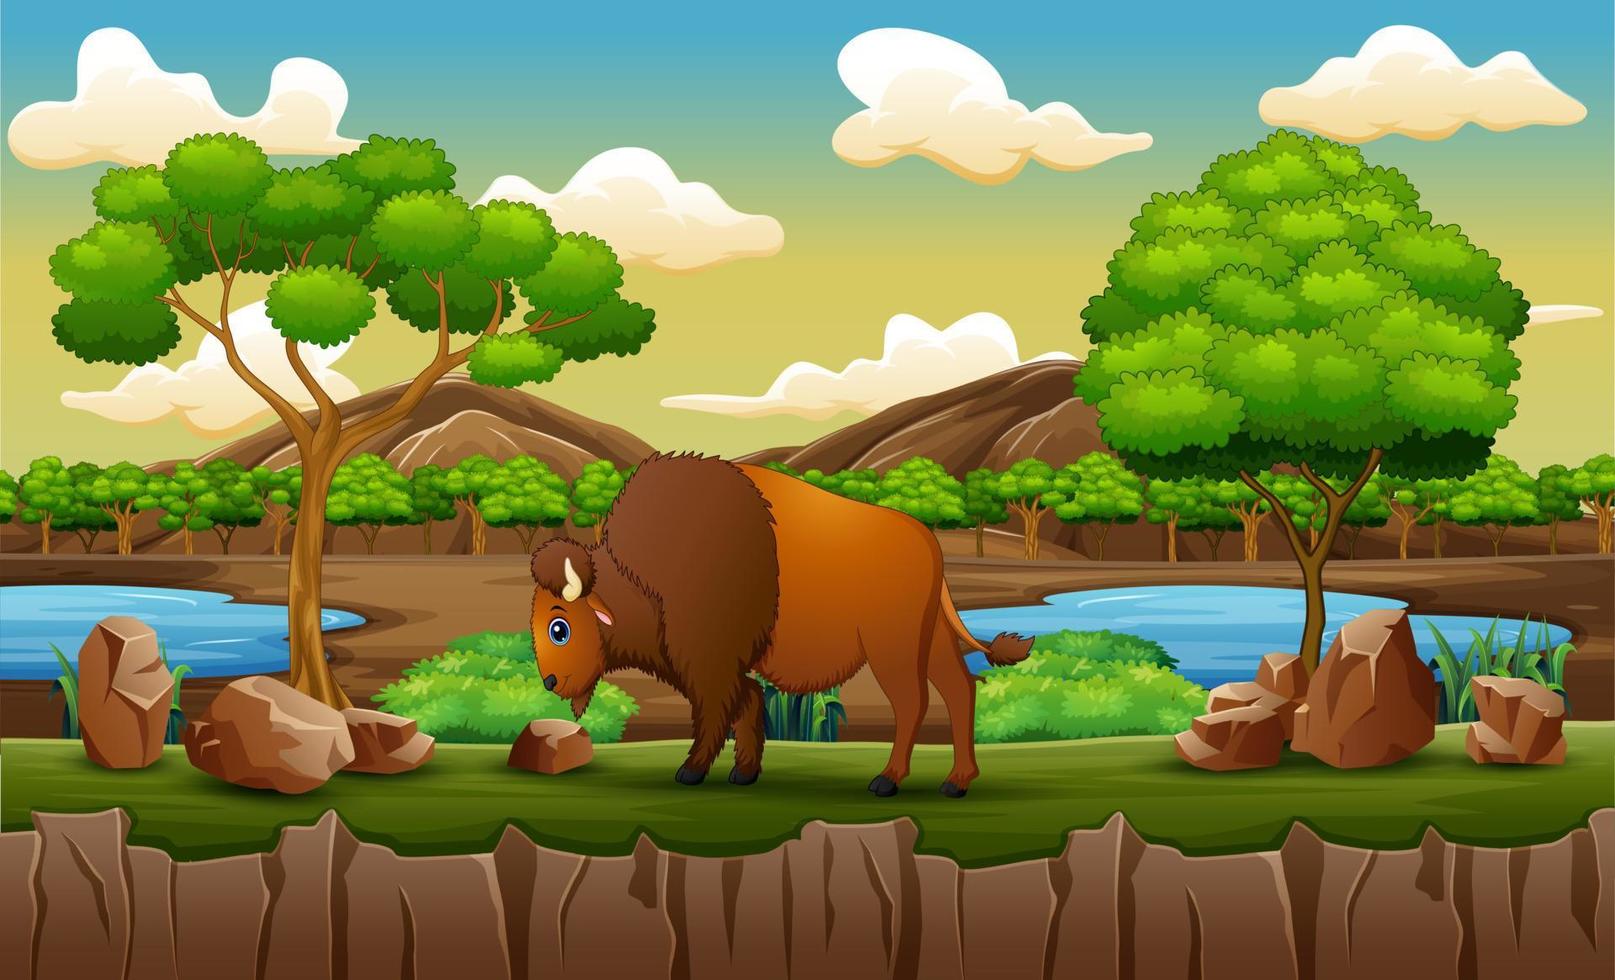 Nature scene with buffalo in the zoo open park vector